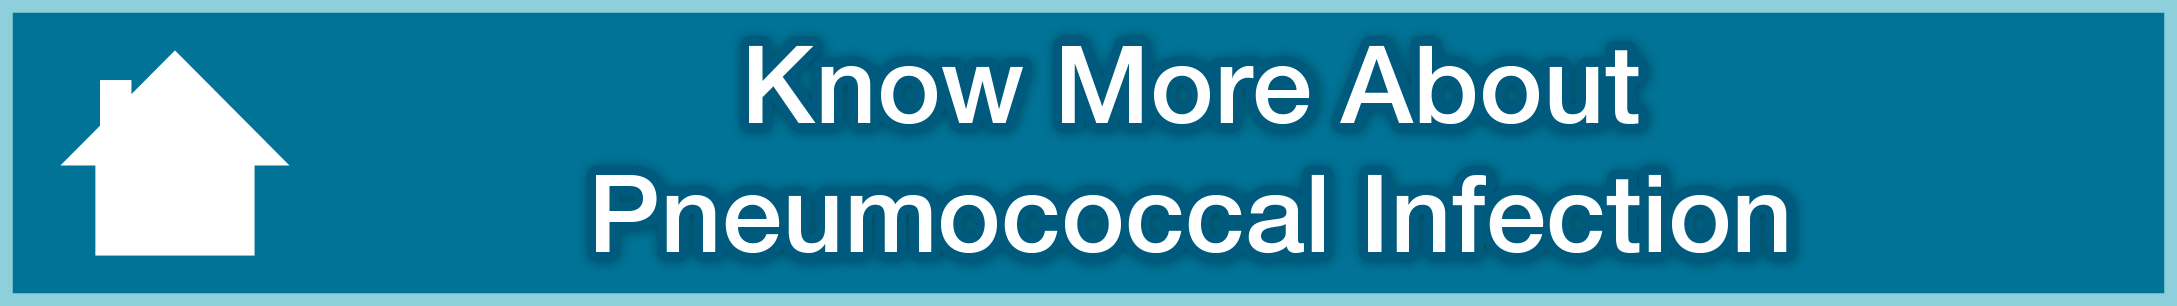 Know More About Pneumococcal Infection